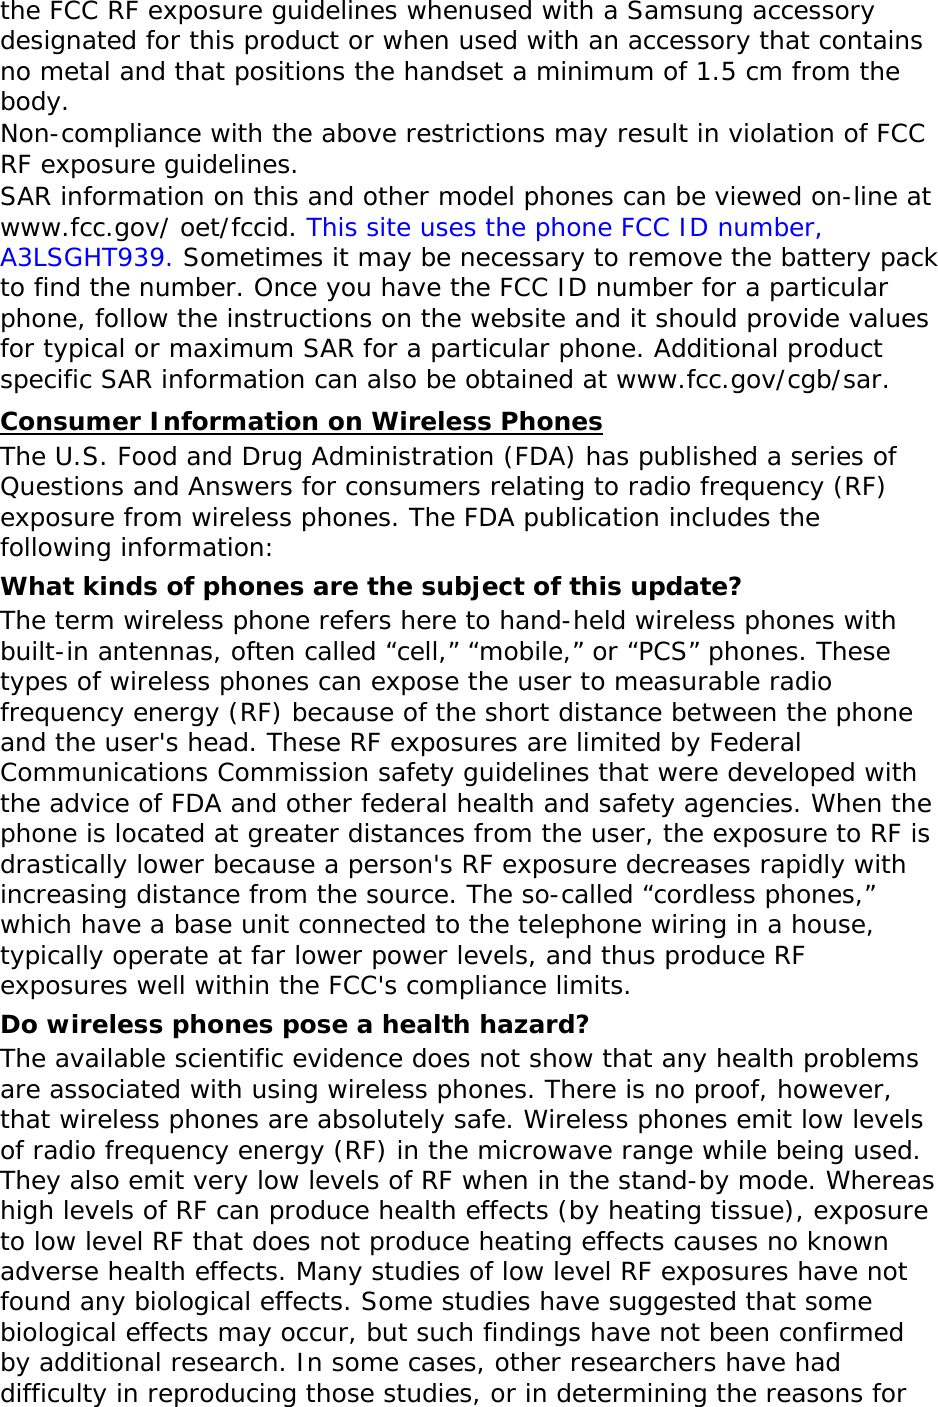 the FCC RF exposure guidelines whenused with a Samsung accessory designated for this product or when used with an accessory that contains no metal and that positions the handset a minimum of 1.5 cm from the body.  Non-compliance with the above restrictions may result in violation of FCC RF exposure guidelines. SAR information on this and other model phones can be viewed on-line at www.fcc.gov/ oet/fccid. This site uses the phone FCC ID number, A3LSGHT939. Sometimes it may be necessary to remove the battery pack to find the number. Once you have the FCC ID number for a particular phone, follow the instructions on the website and it should provide values for typical or maximum SAR for a particular phone. Additional product specific SAR information can also be obtained at www.fcc.gov/cgb/sar. Consumer Information on Wireless Phones The U.S. Food and Drug Administration (FDA) has published a series of Questions and Answers for consumers relating to radio frequency (RF) exposure from wireless phones. The FDA publication includes the following information: What kinds of phones are the subject of this update? The term wireless phone refers here to hand-held wireless phones with built-in antennas, often called “cell,” “mobile,” or “PCS” phones. These types of wireless phones can expose the user to measurable radio frequency energy (RF) because of the short distance between the phone and the user&apos;s head. These RF exposures are limited by Federal Communications Commission safety guidelines that were developed with the advice of FDA and other federal health and safety agencies. When the phone is located at greater distances from the user, the exposure to RF is drastically lower because a person&apos;s RF exposure decreases rapidly with increasing distance from the source. The so-called “cordless phones,” which have a base unit connected to the telephone wiring in a house, typically operate at far lower power levels, and thus produce RF exposures well within the FCC&apos;s compliance limits. Do wireless phones pose a health hazard? The available scientific evidence does not show that any health problems are associated with using wireless phones. There is no proof, however, that wireless phones are absolutely safe. Wireless phones emit low levels of radio frequency energy (RF) in the microwave range while being used. They also emit very low levels of RF when in the stand-by mode. Whereas high levels of RF can produce health effects (by heating tissue), exposure to low level RF that does not produce heating effects causes no known adverse health effects. Many studies of low level RF exposures have not found any biological effects. Some studies have suggested that some biological effects may occur, but such findings have not been confirmed by additional research. In some cases, other researchers have had difficulty in reproducing those studies, or in determining the reasons for 